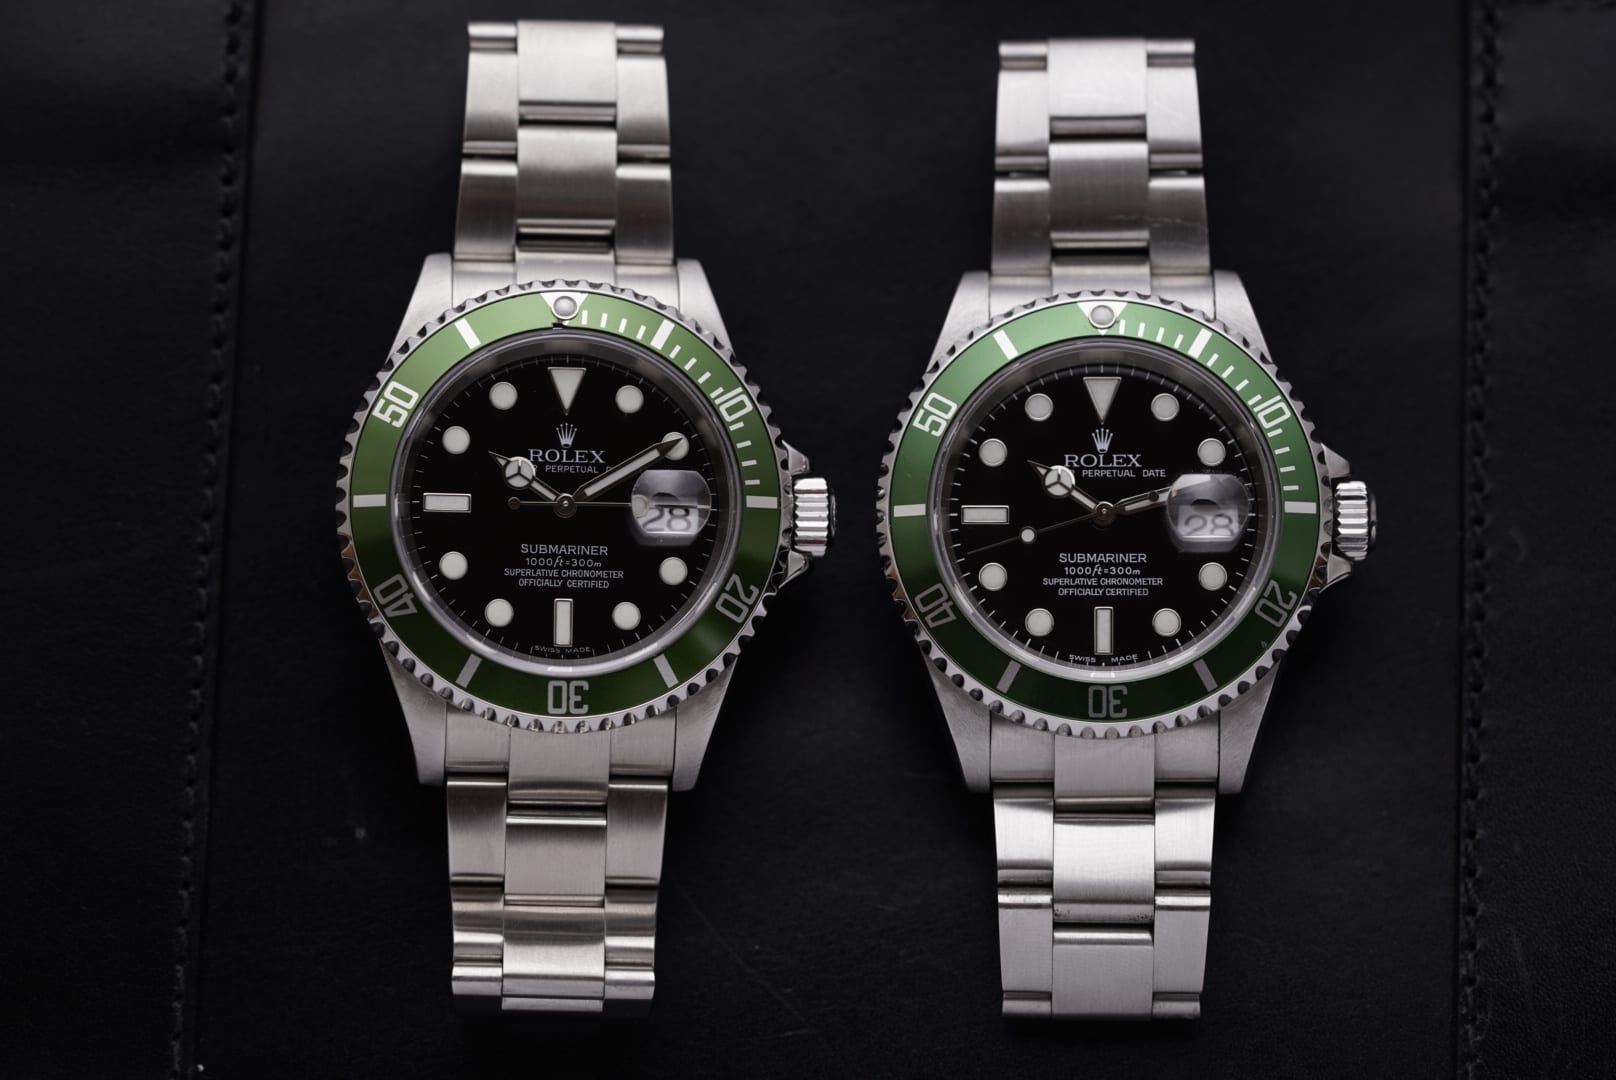 Rolex 16610LV Submariner Anniversary Fat/Flat Four 4 Kermit Full Set  Unpolished - Awadwatches